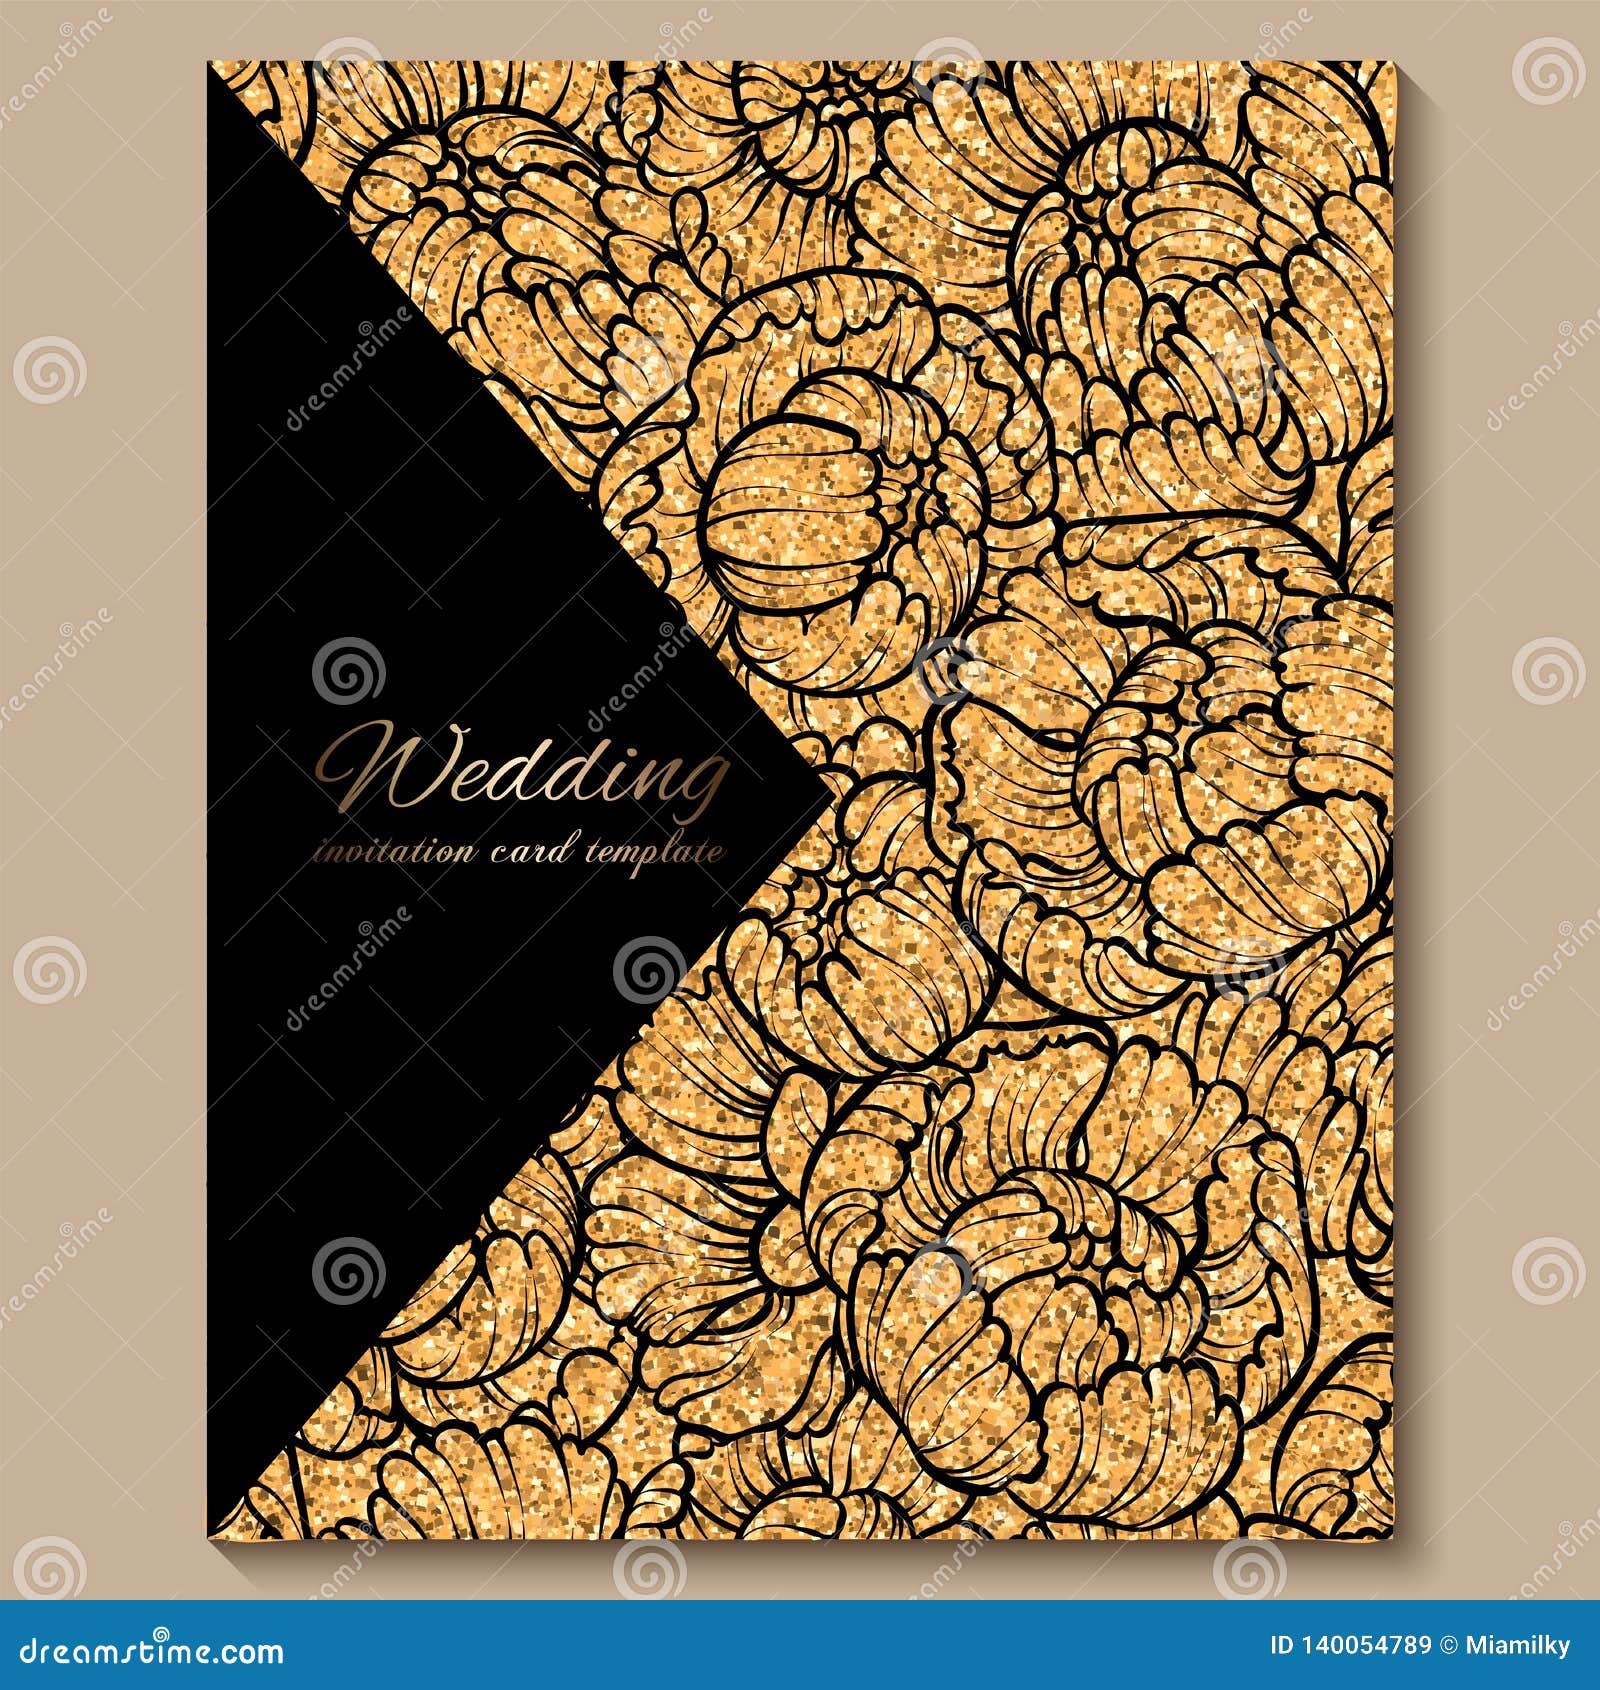 Antique Royal Luxury Wedding Invitation Card, Golden Glitter Background  with Frame and Place for Text, Black Lacy Foliage Made of Stock  Illustration - Illustration of antique, booklet: 140054789